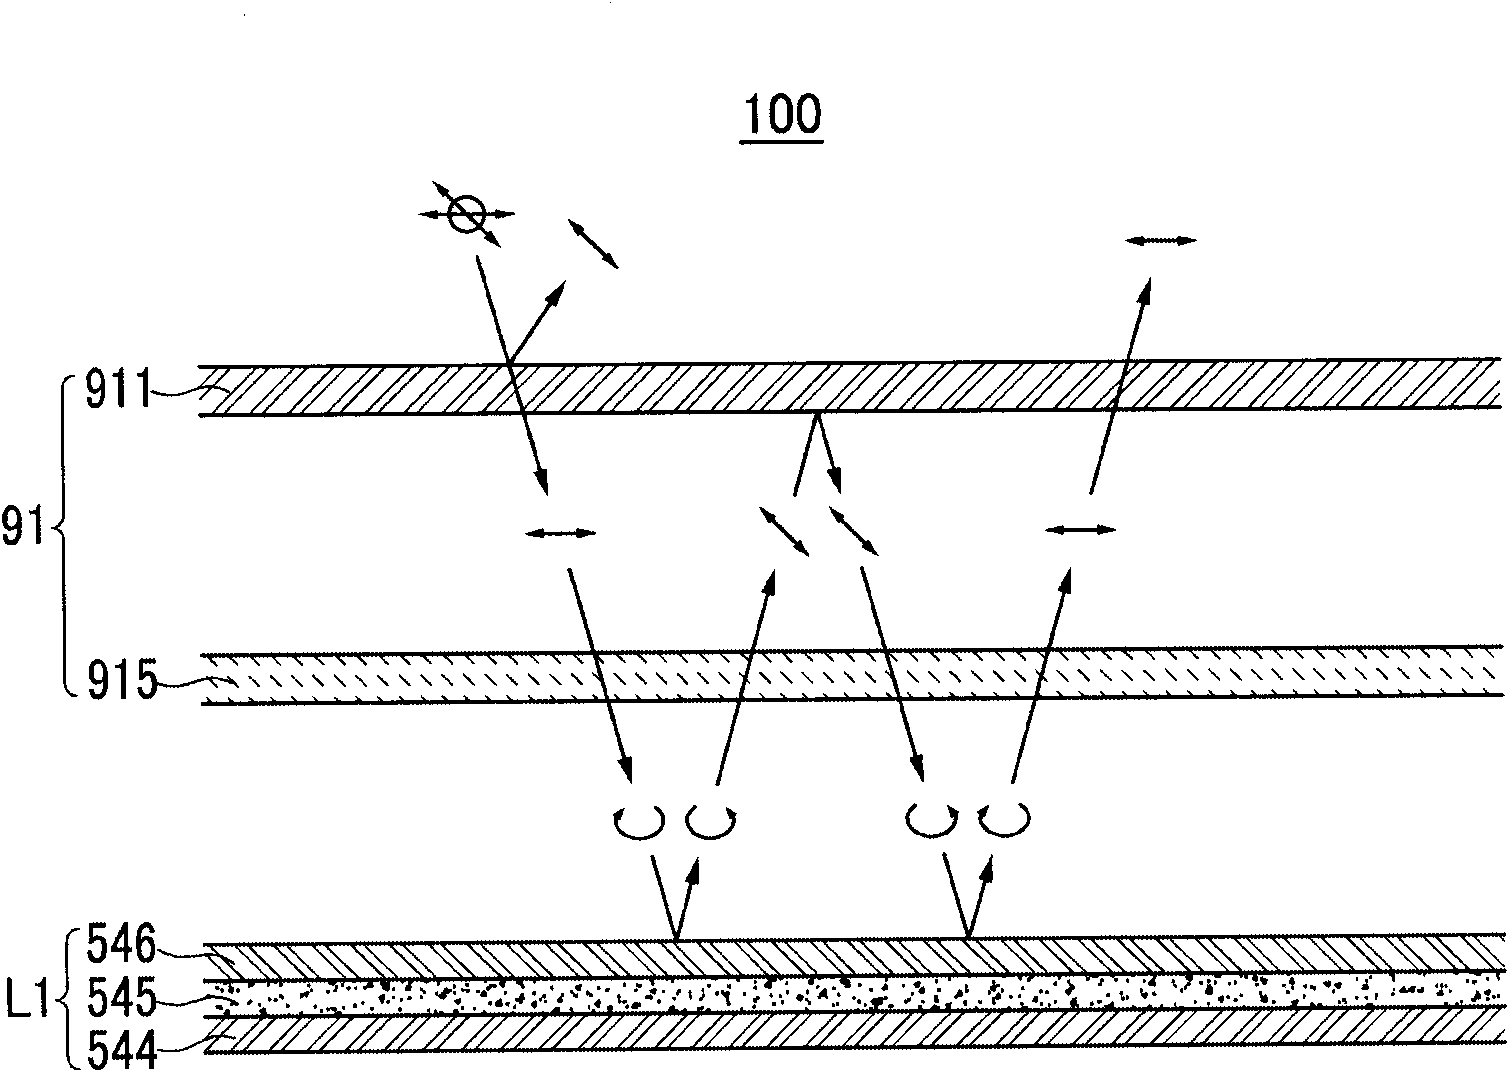 Organic light emitting diode display with a mirror function